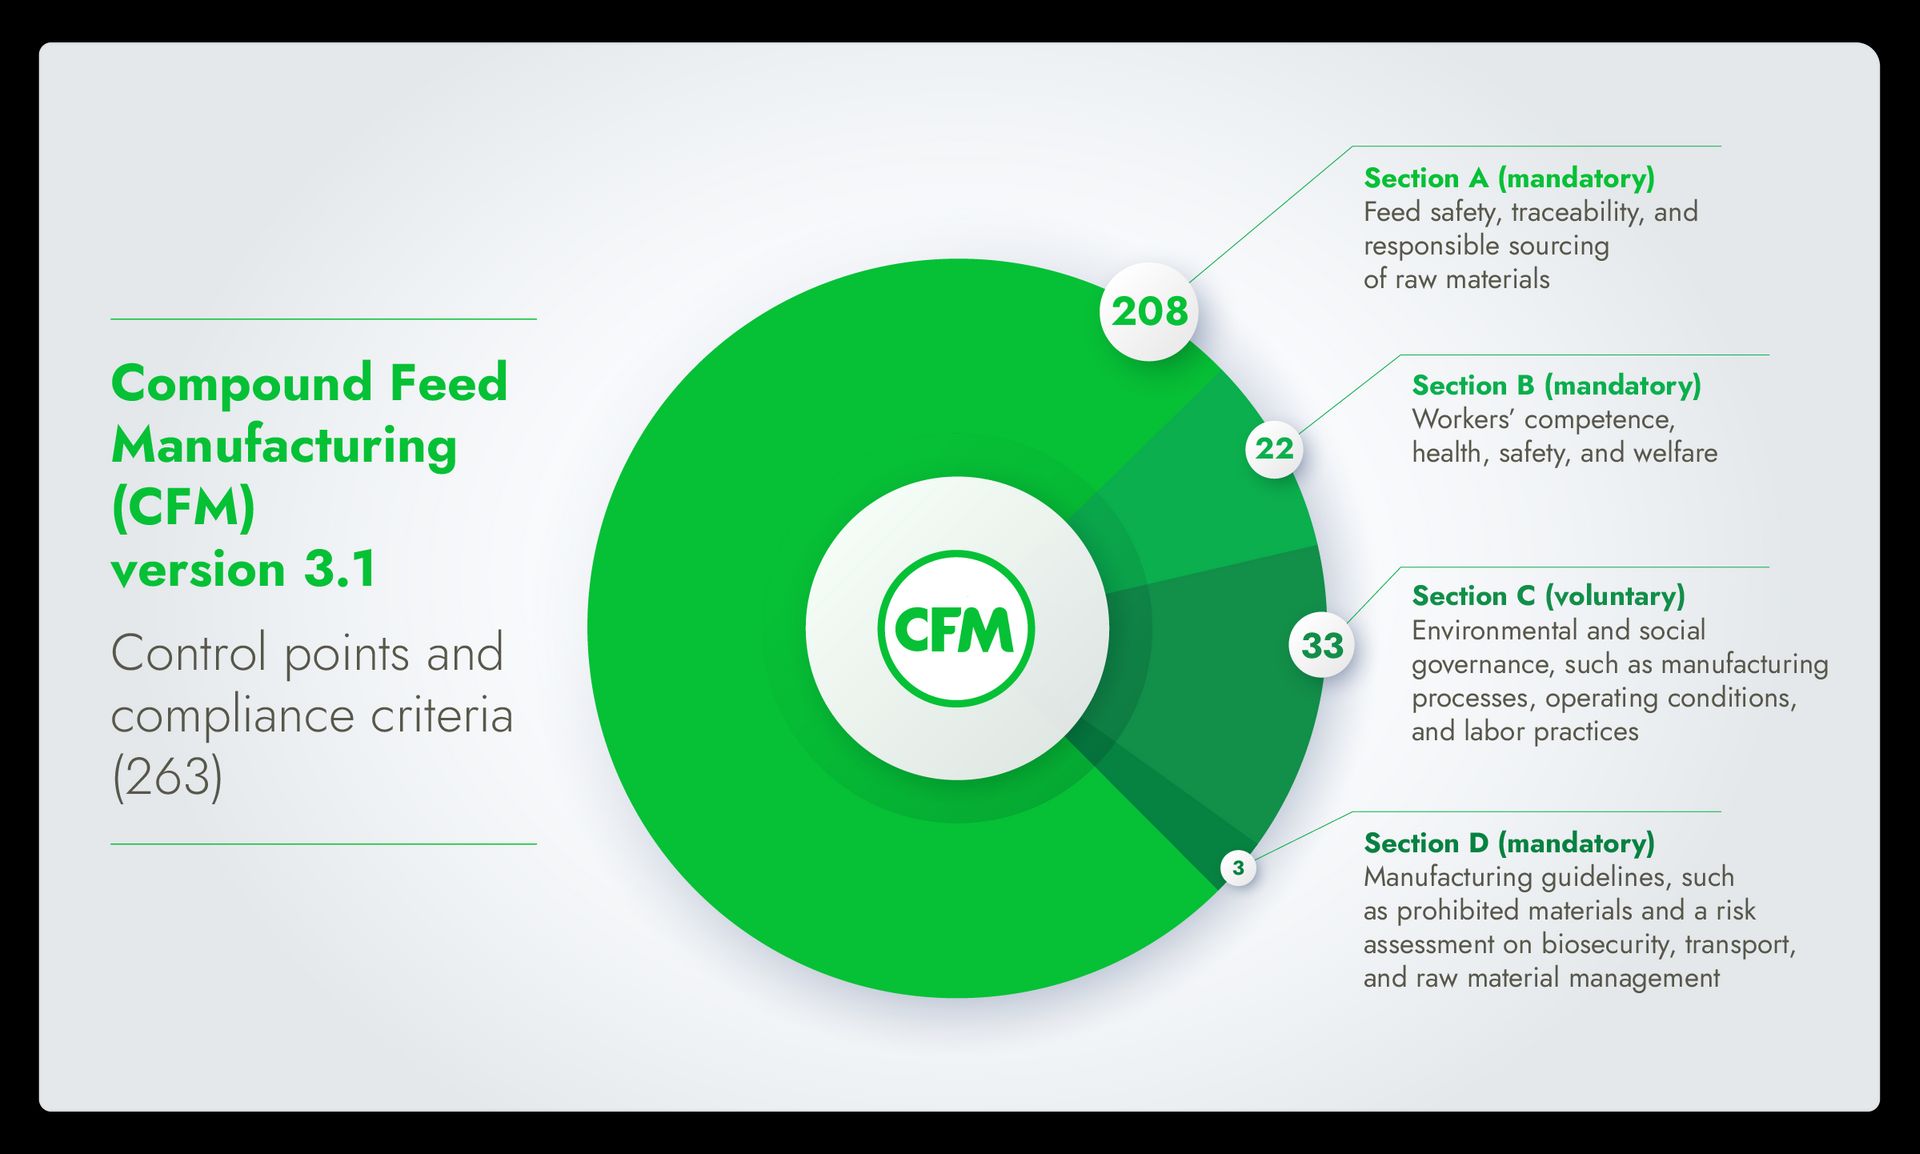 Infographic showing the control points and compliance criteria of Compound Feed Manufacturing version 3.1